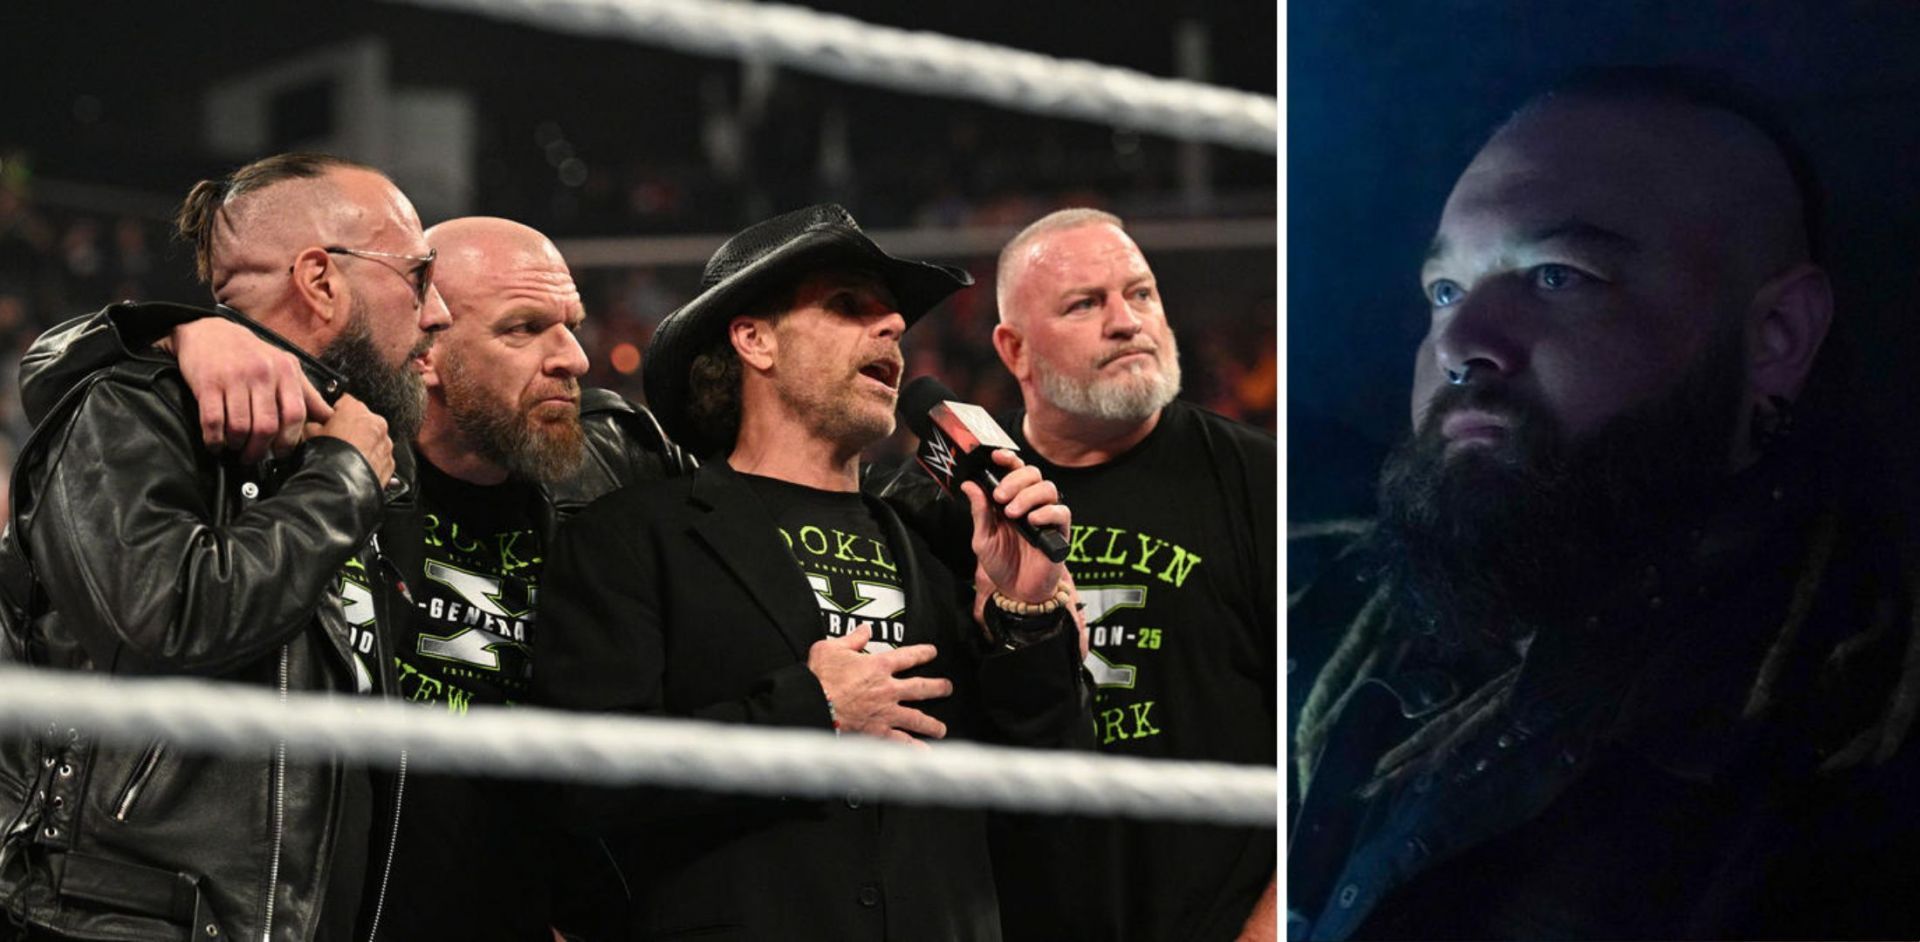 DX celebrated their 25th anniversary on WWE RAW